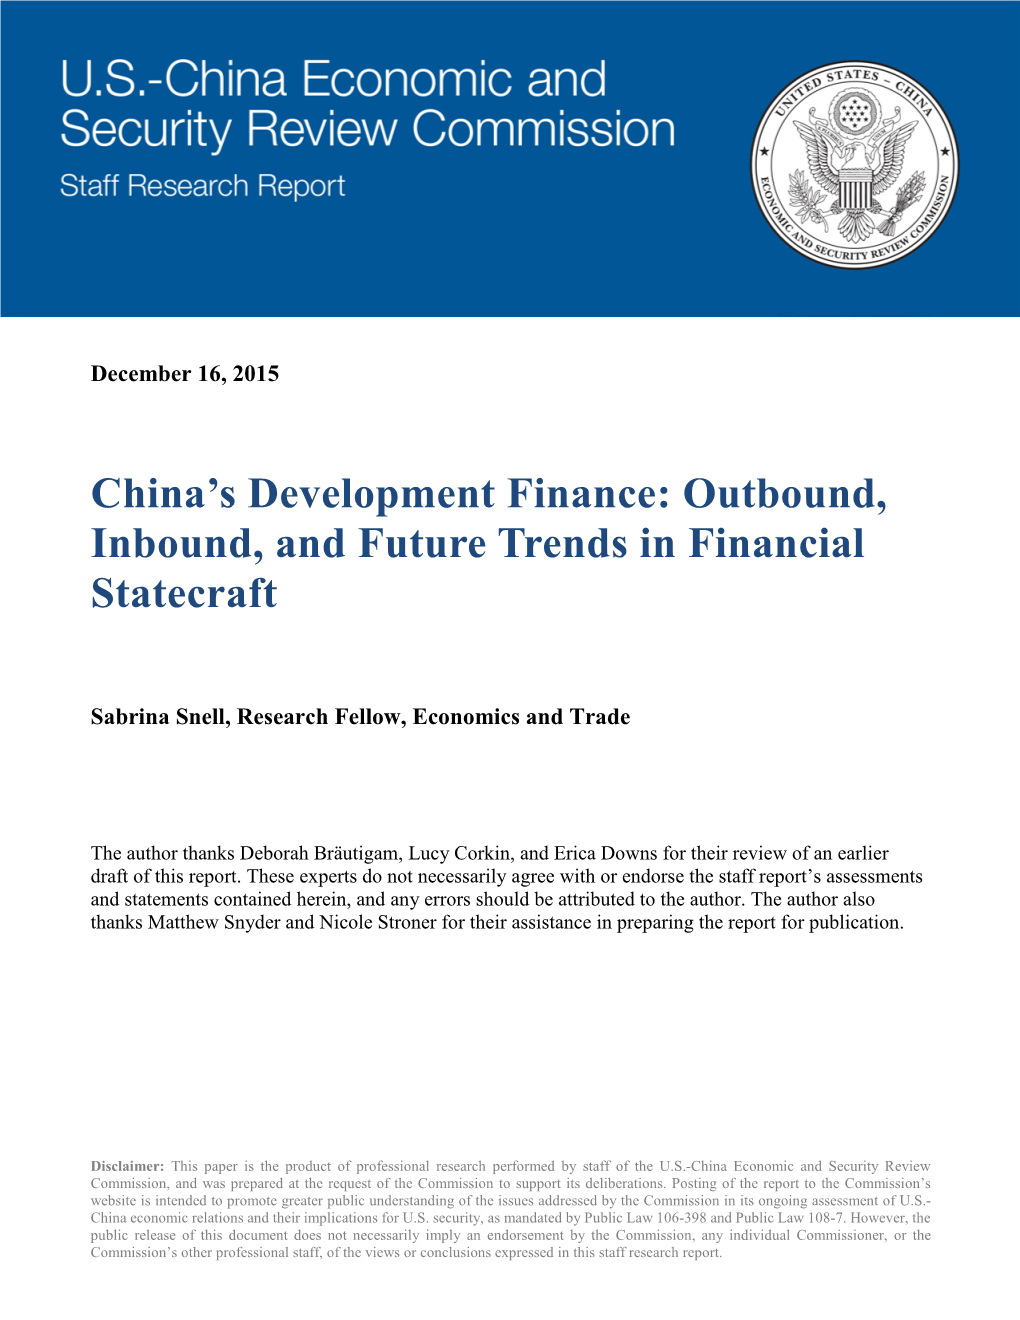 Outbound, Inbound, and Future Trends in Financial Statecraft